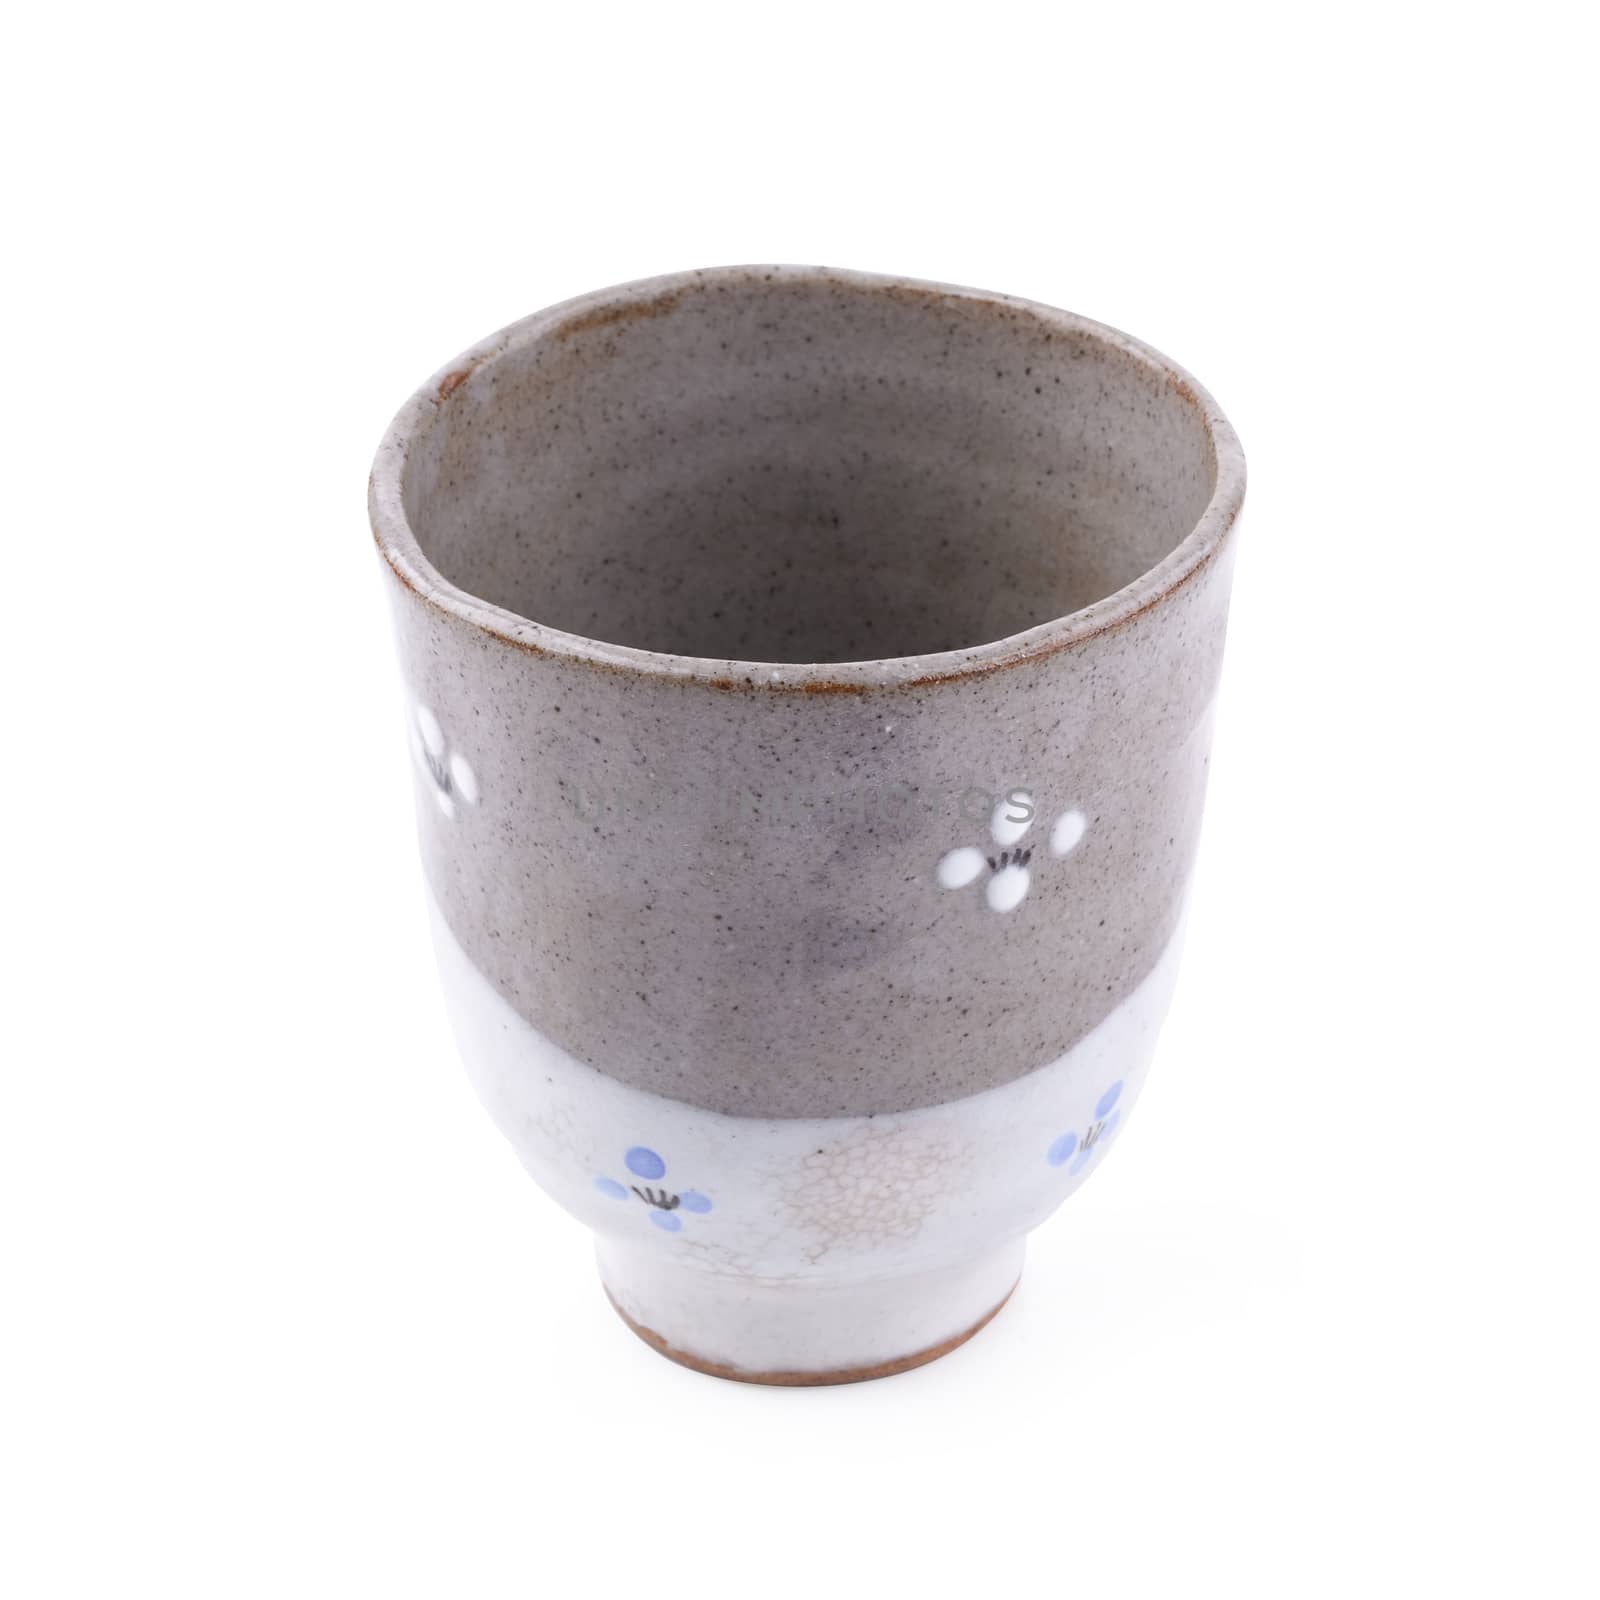 Ceramic black cup isolated on a white background.